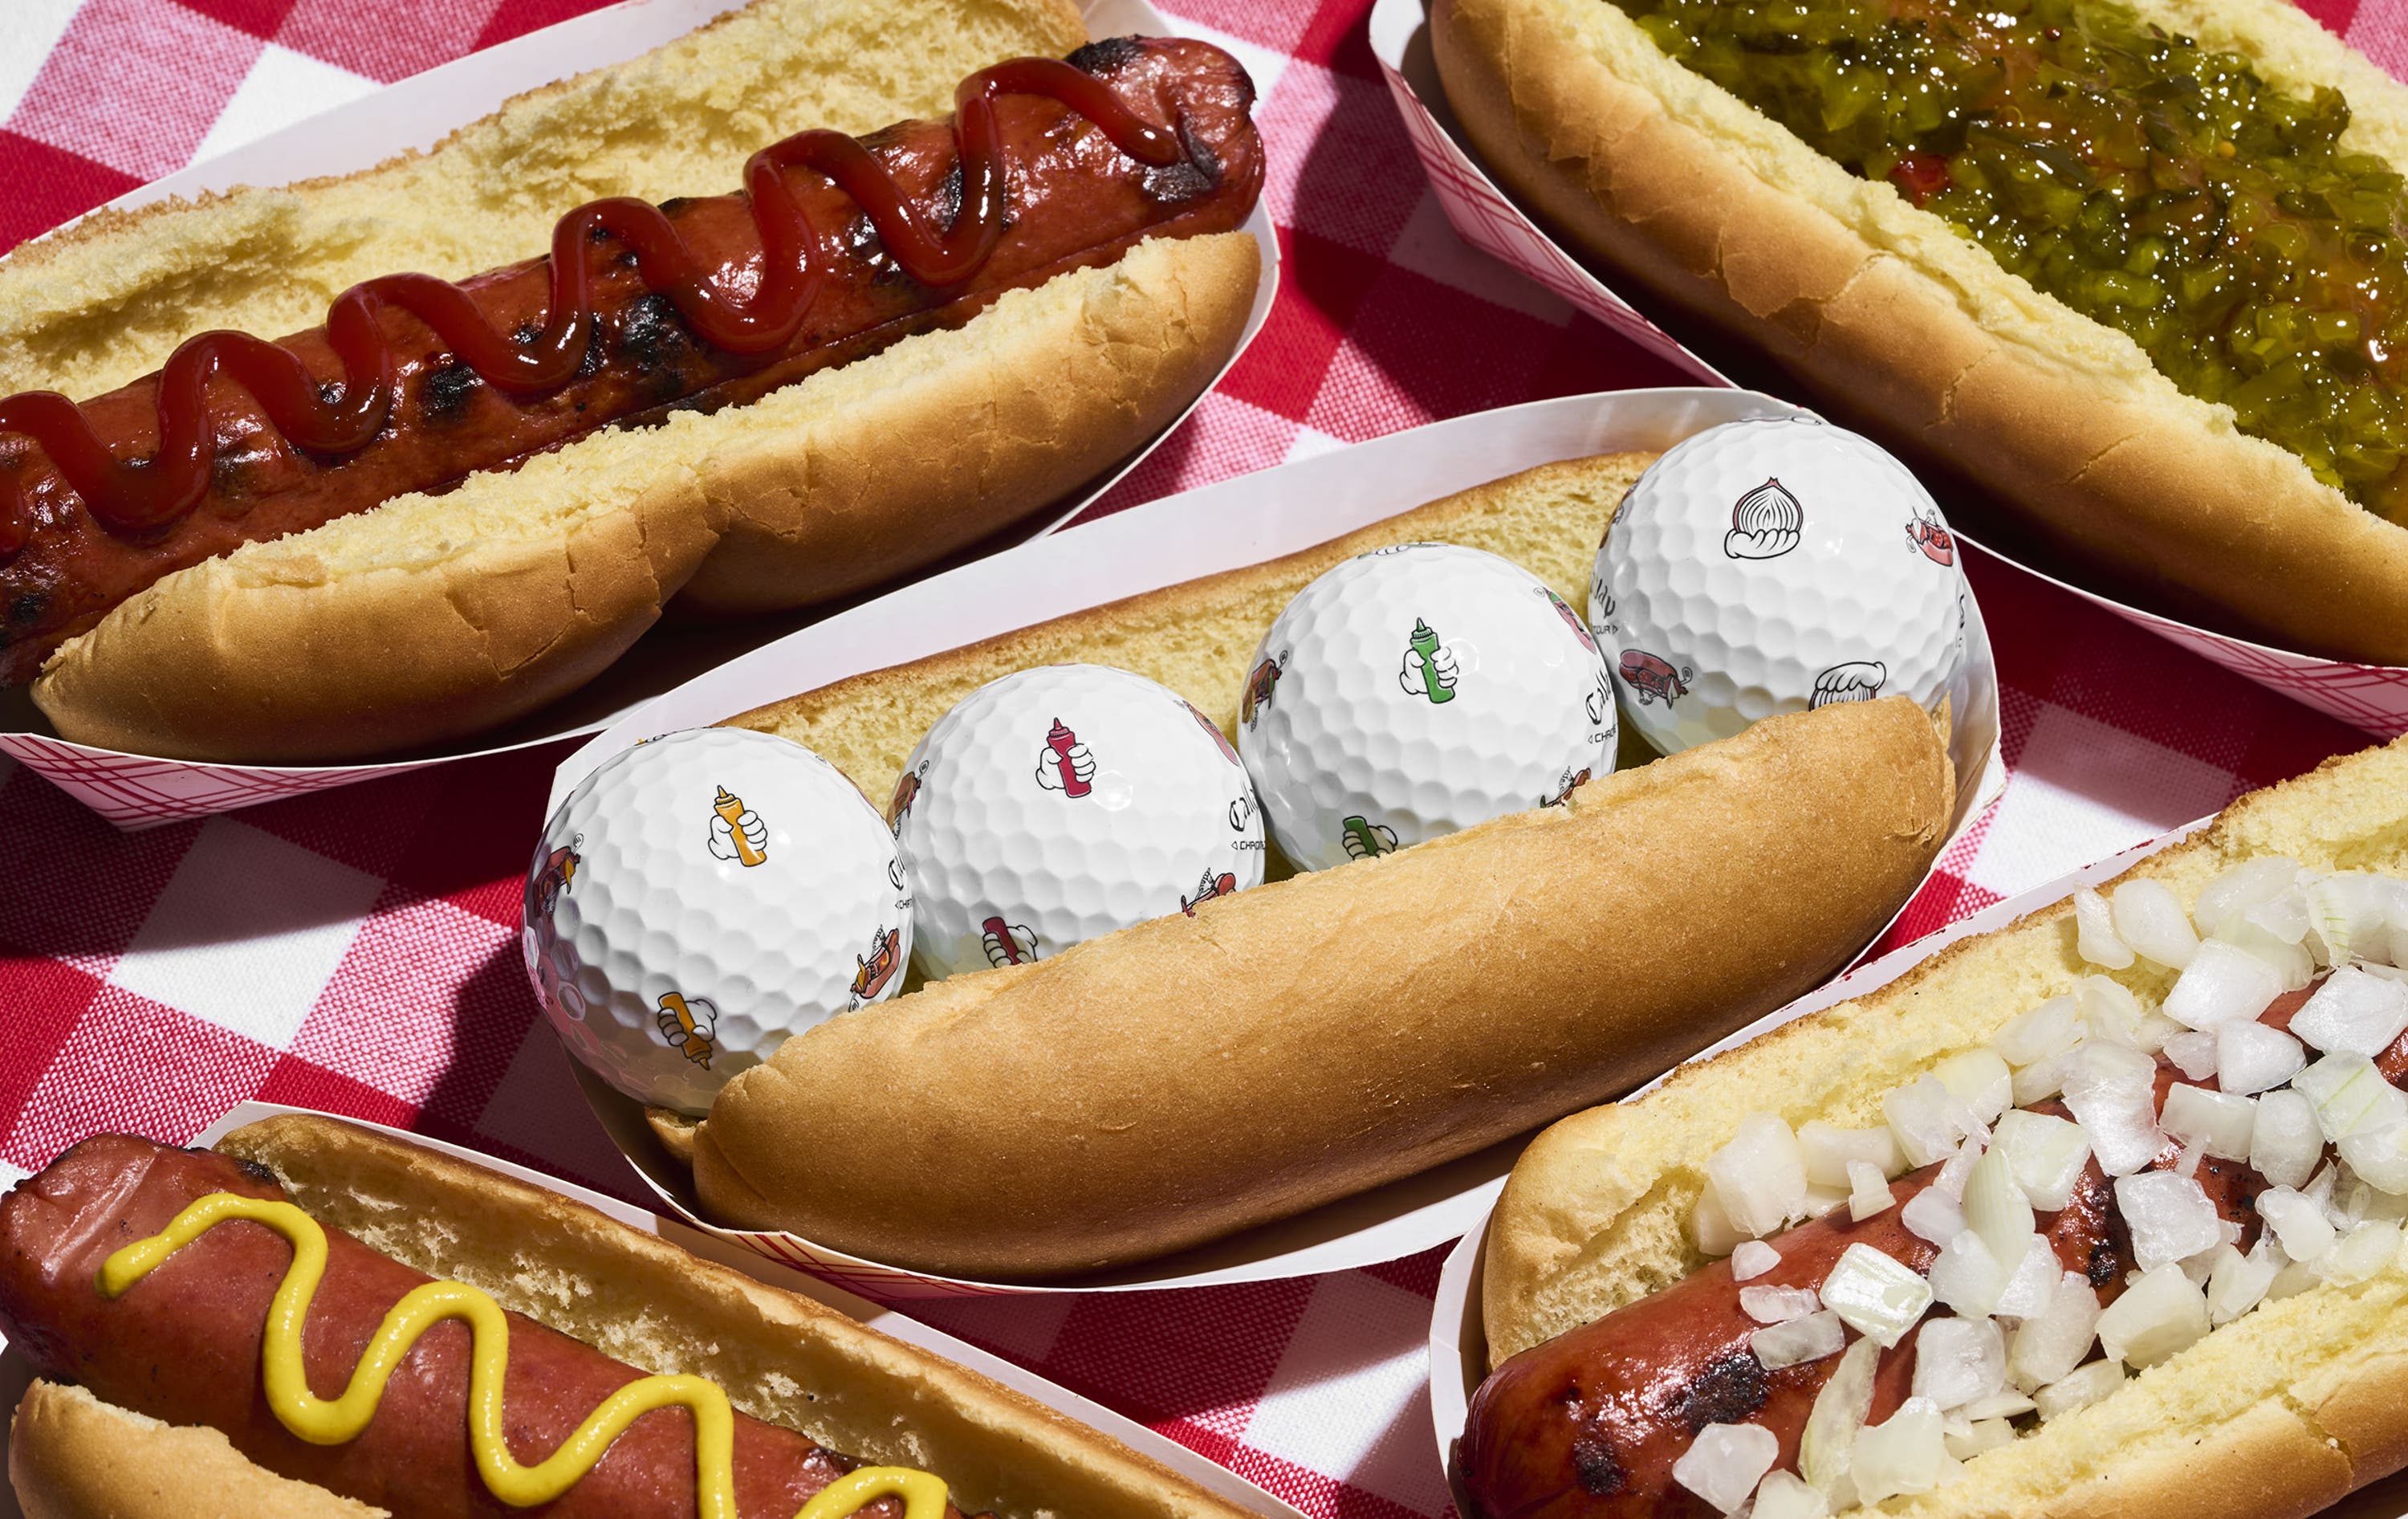 chrome tour golf balls with hot dog designs in a hot dog bun on a picnic table